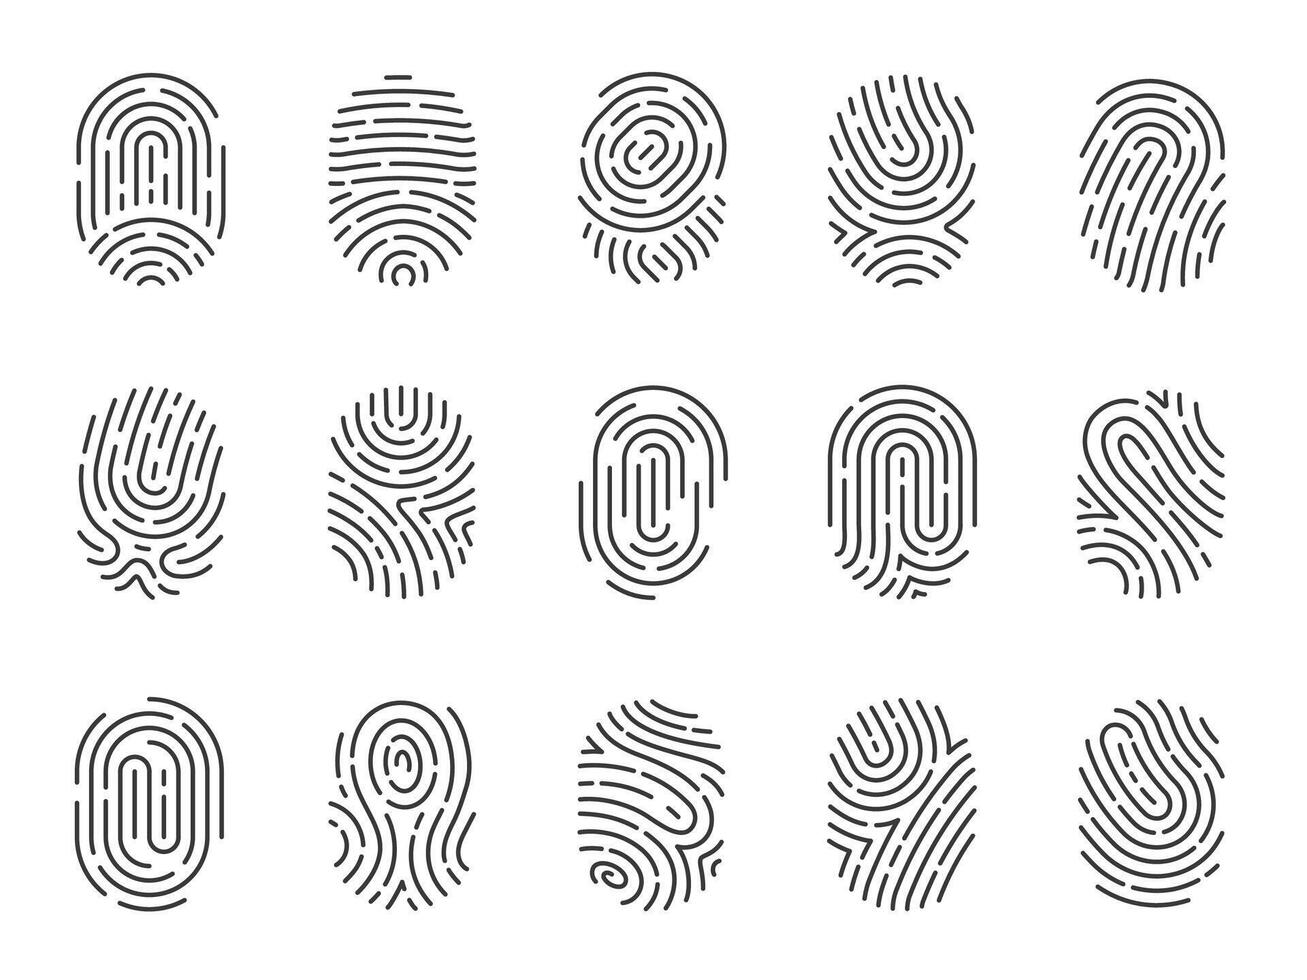 Fingerprint icons. Human thumbprint and finger print icons for security and investigation, biometric id protection and privacy. Vector flat collection